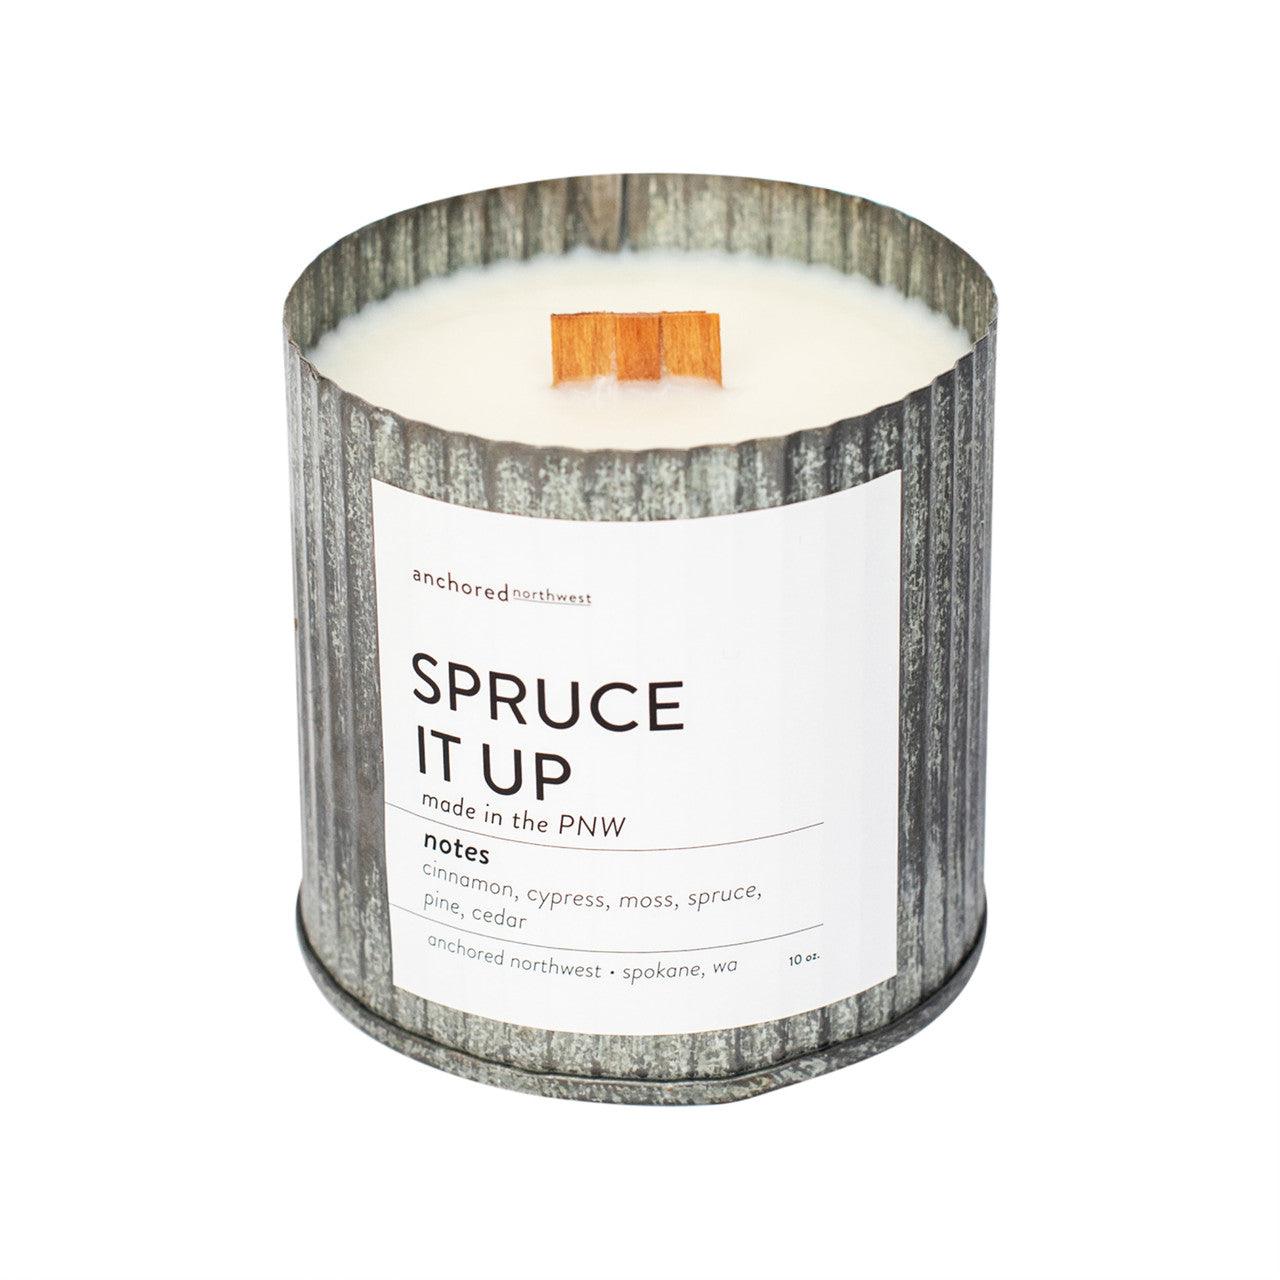 Spruce It Up 10oz Rustic Farmhouse Soy Candle - Anchored Northwest - The Sock Monster